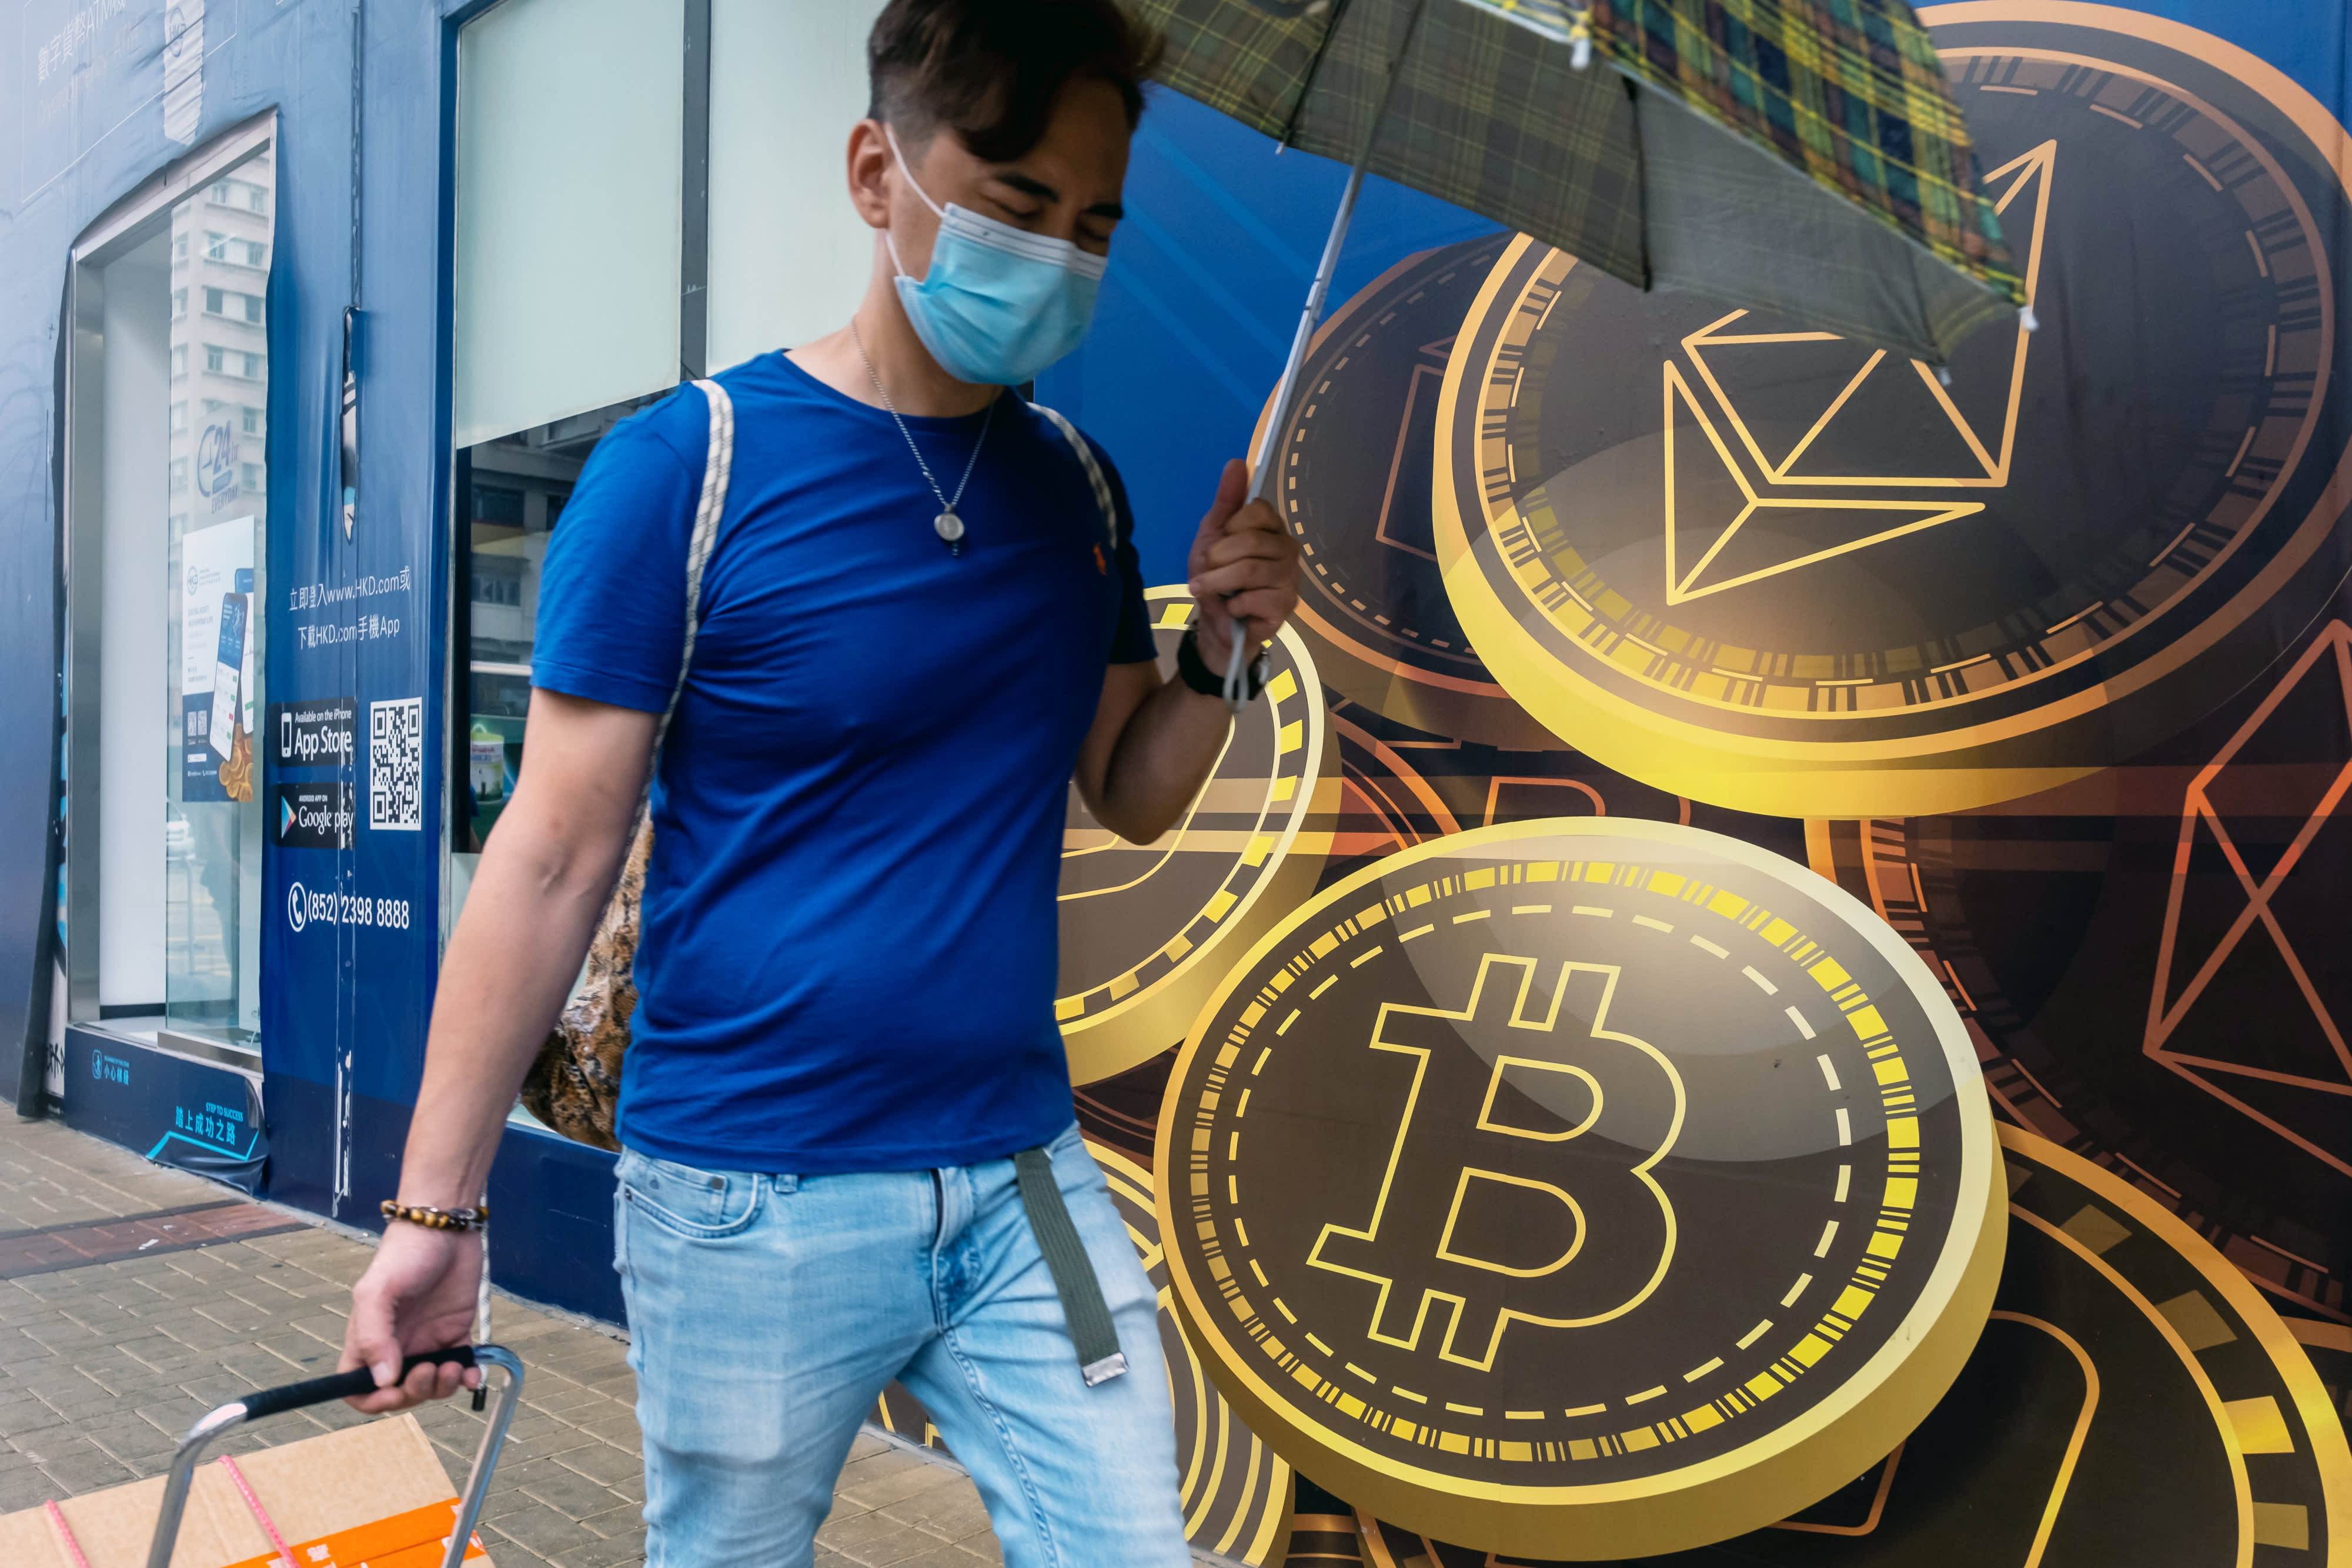 China's central bank renewed its tough talk on bitcoin Friday, calling all digital currency activities illegal and vowing to crack down on the ma